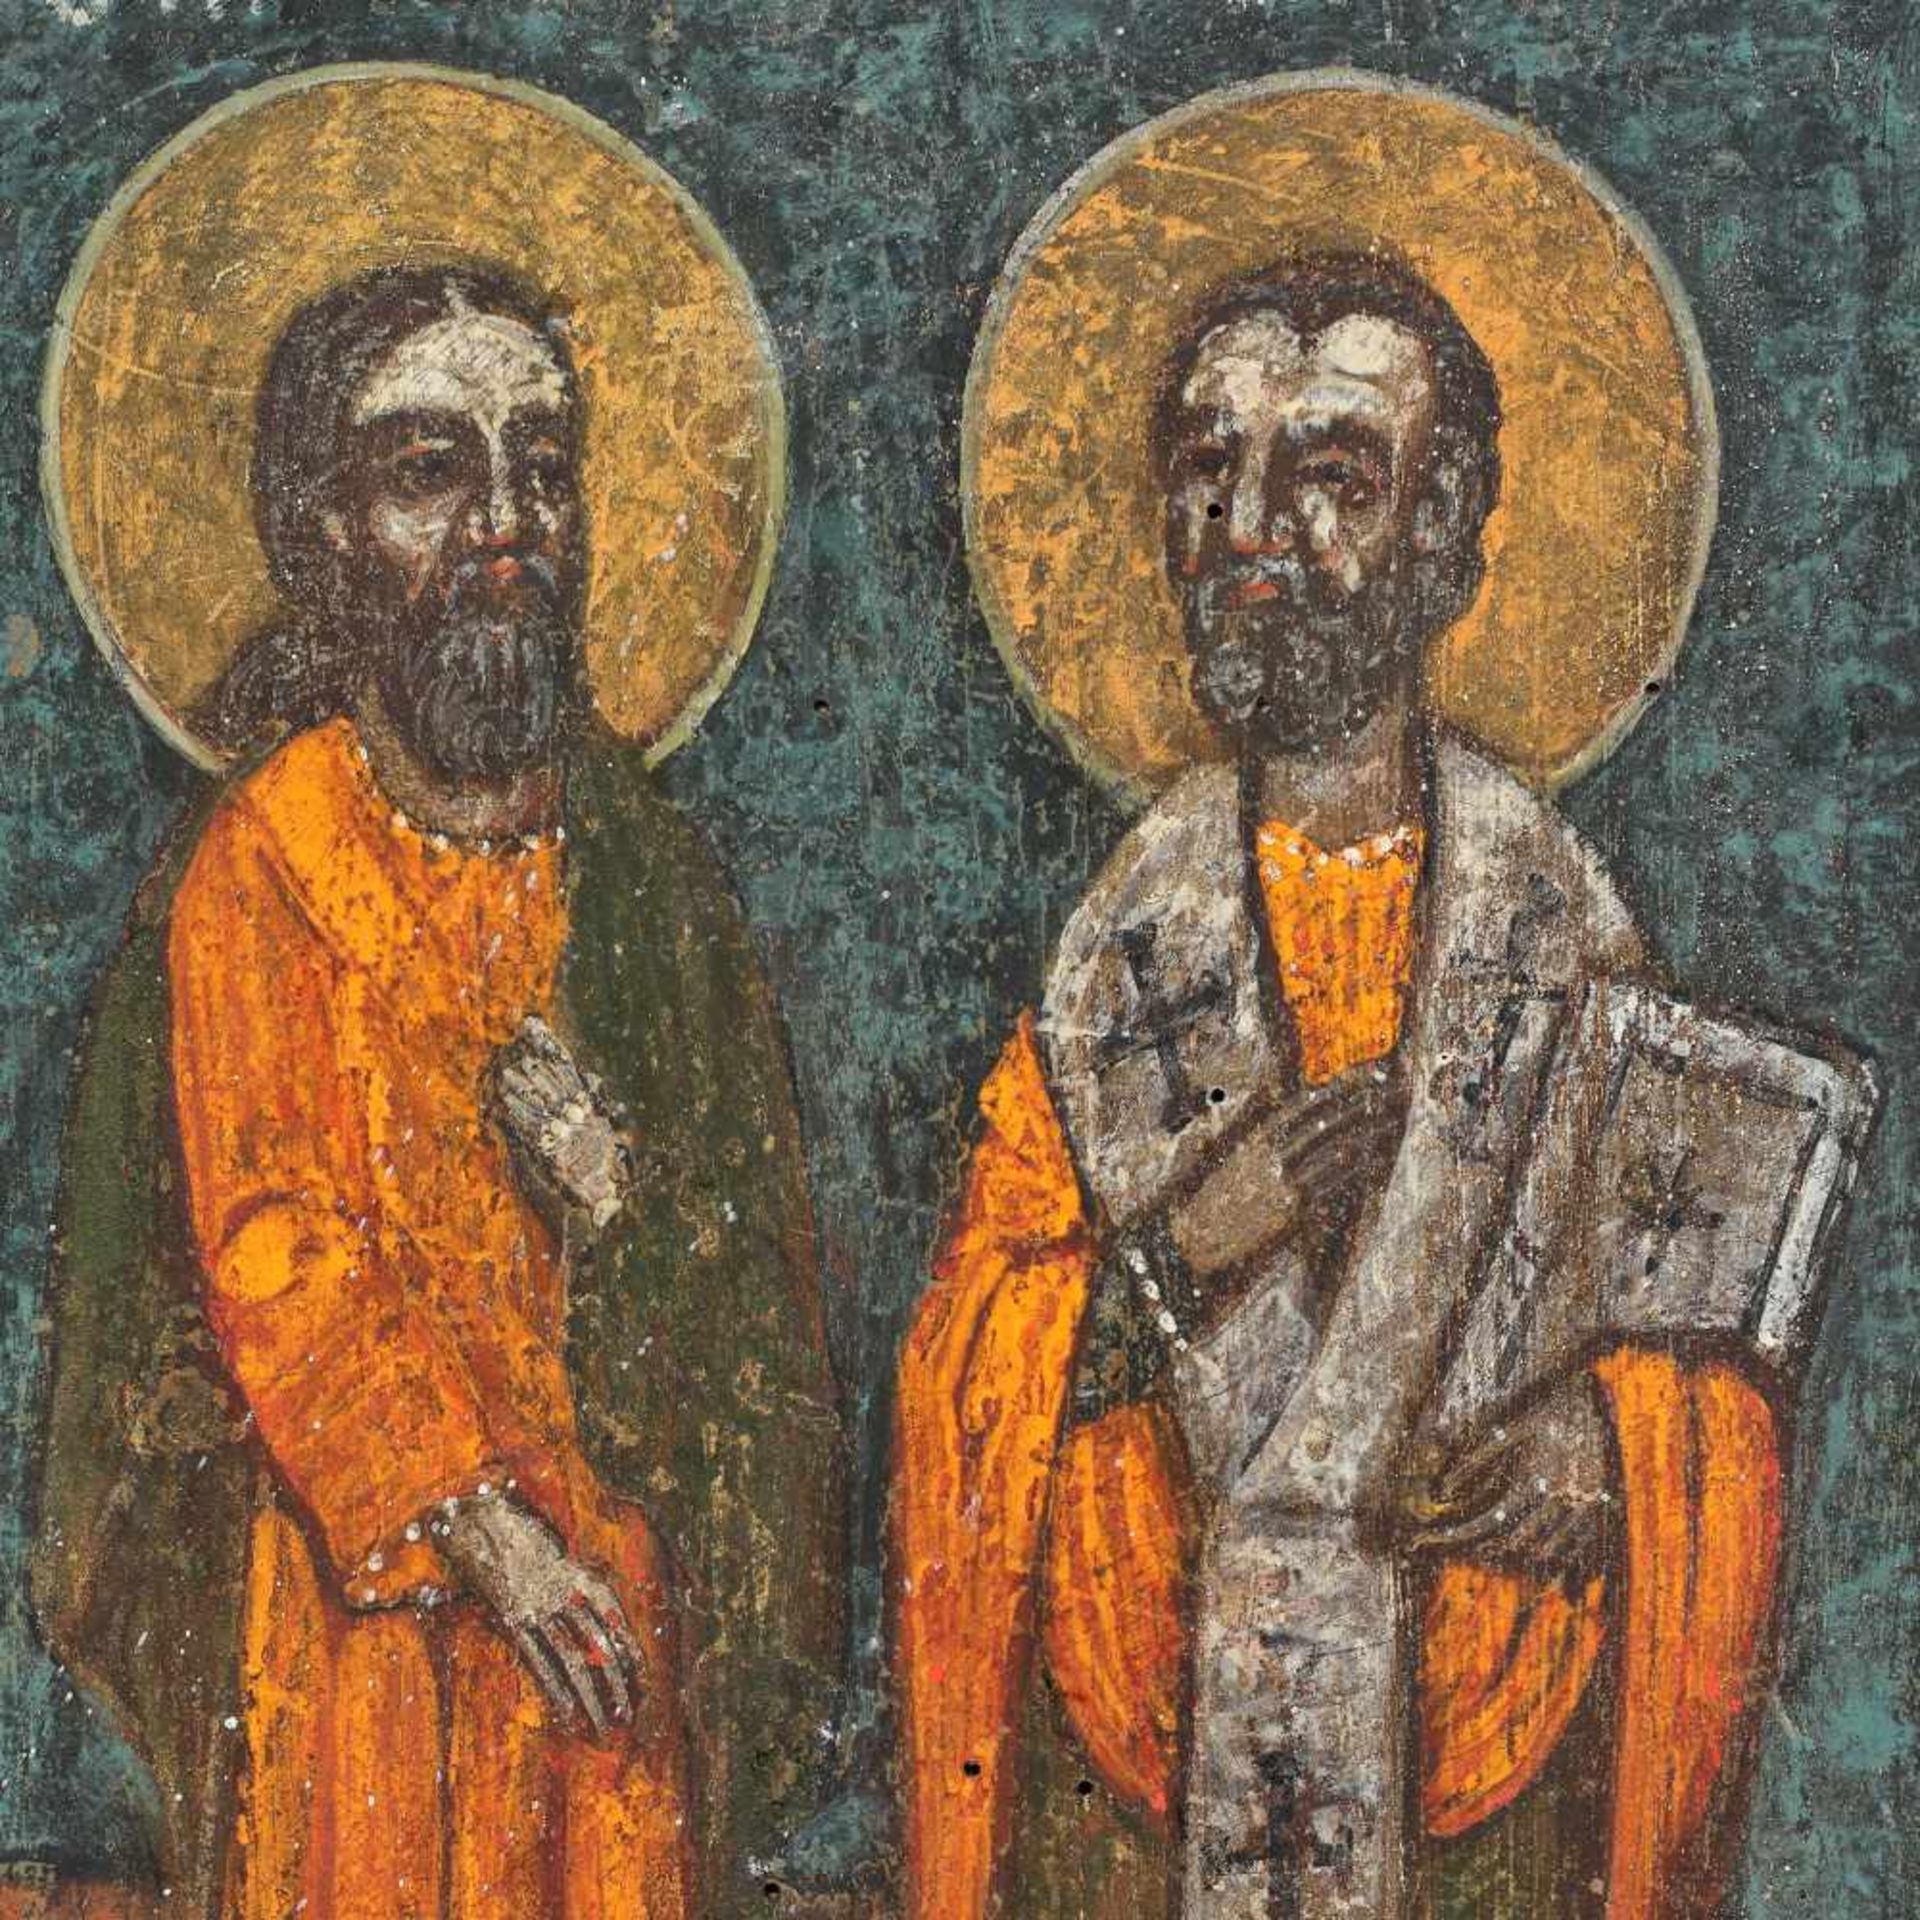 ”The Holy Hierarchs John and Nicholas”, Romanian school, early 19th century - Image 2 of 2